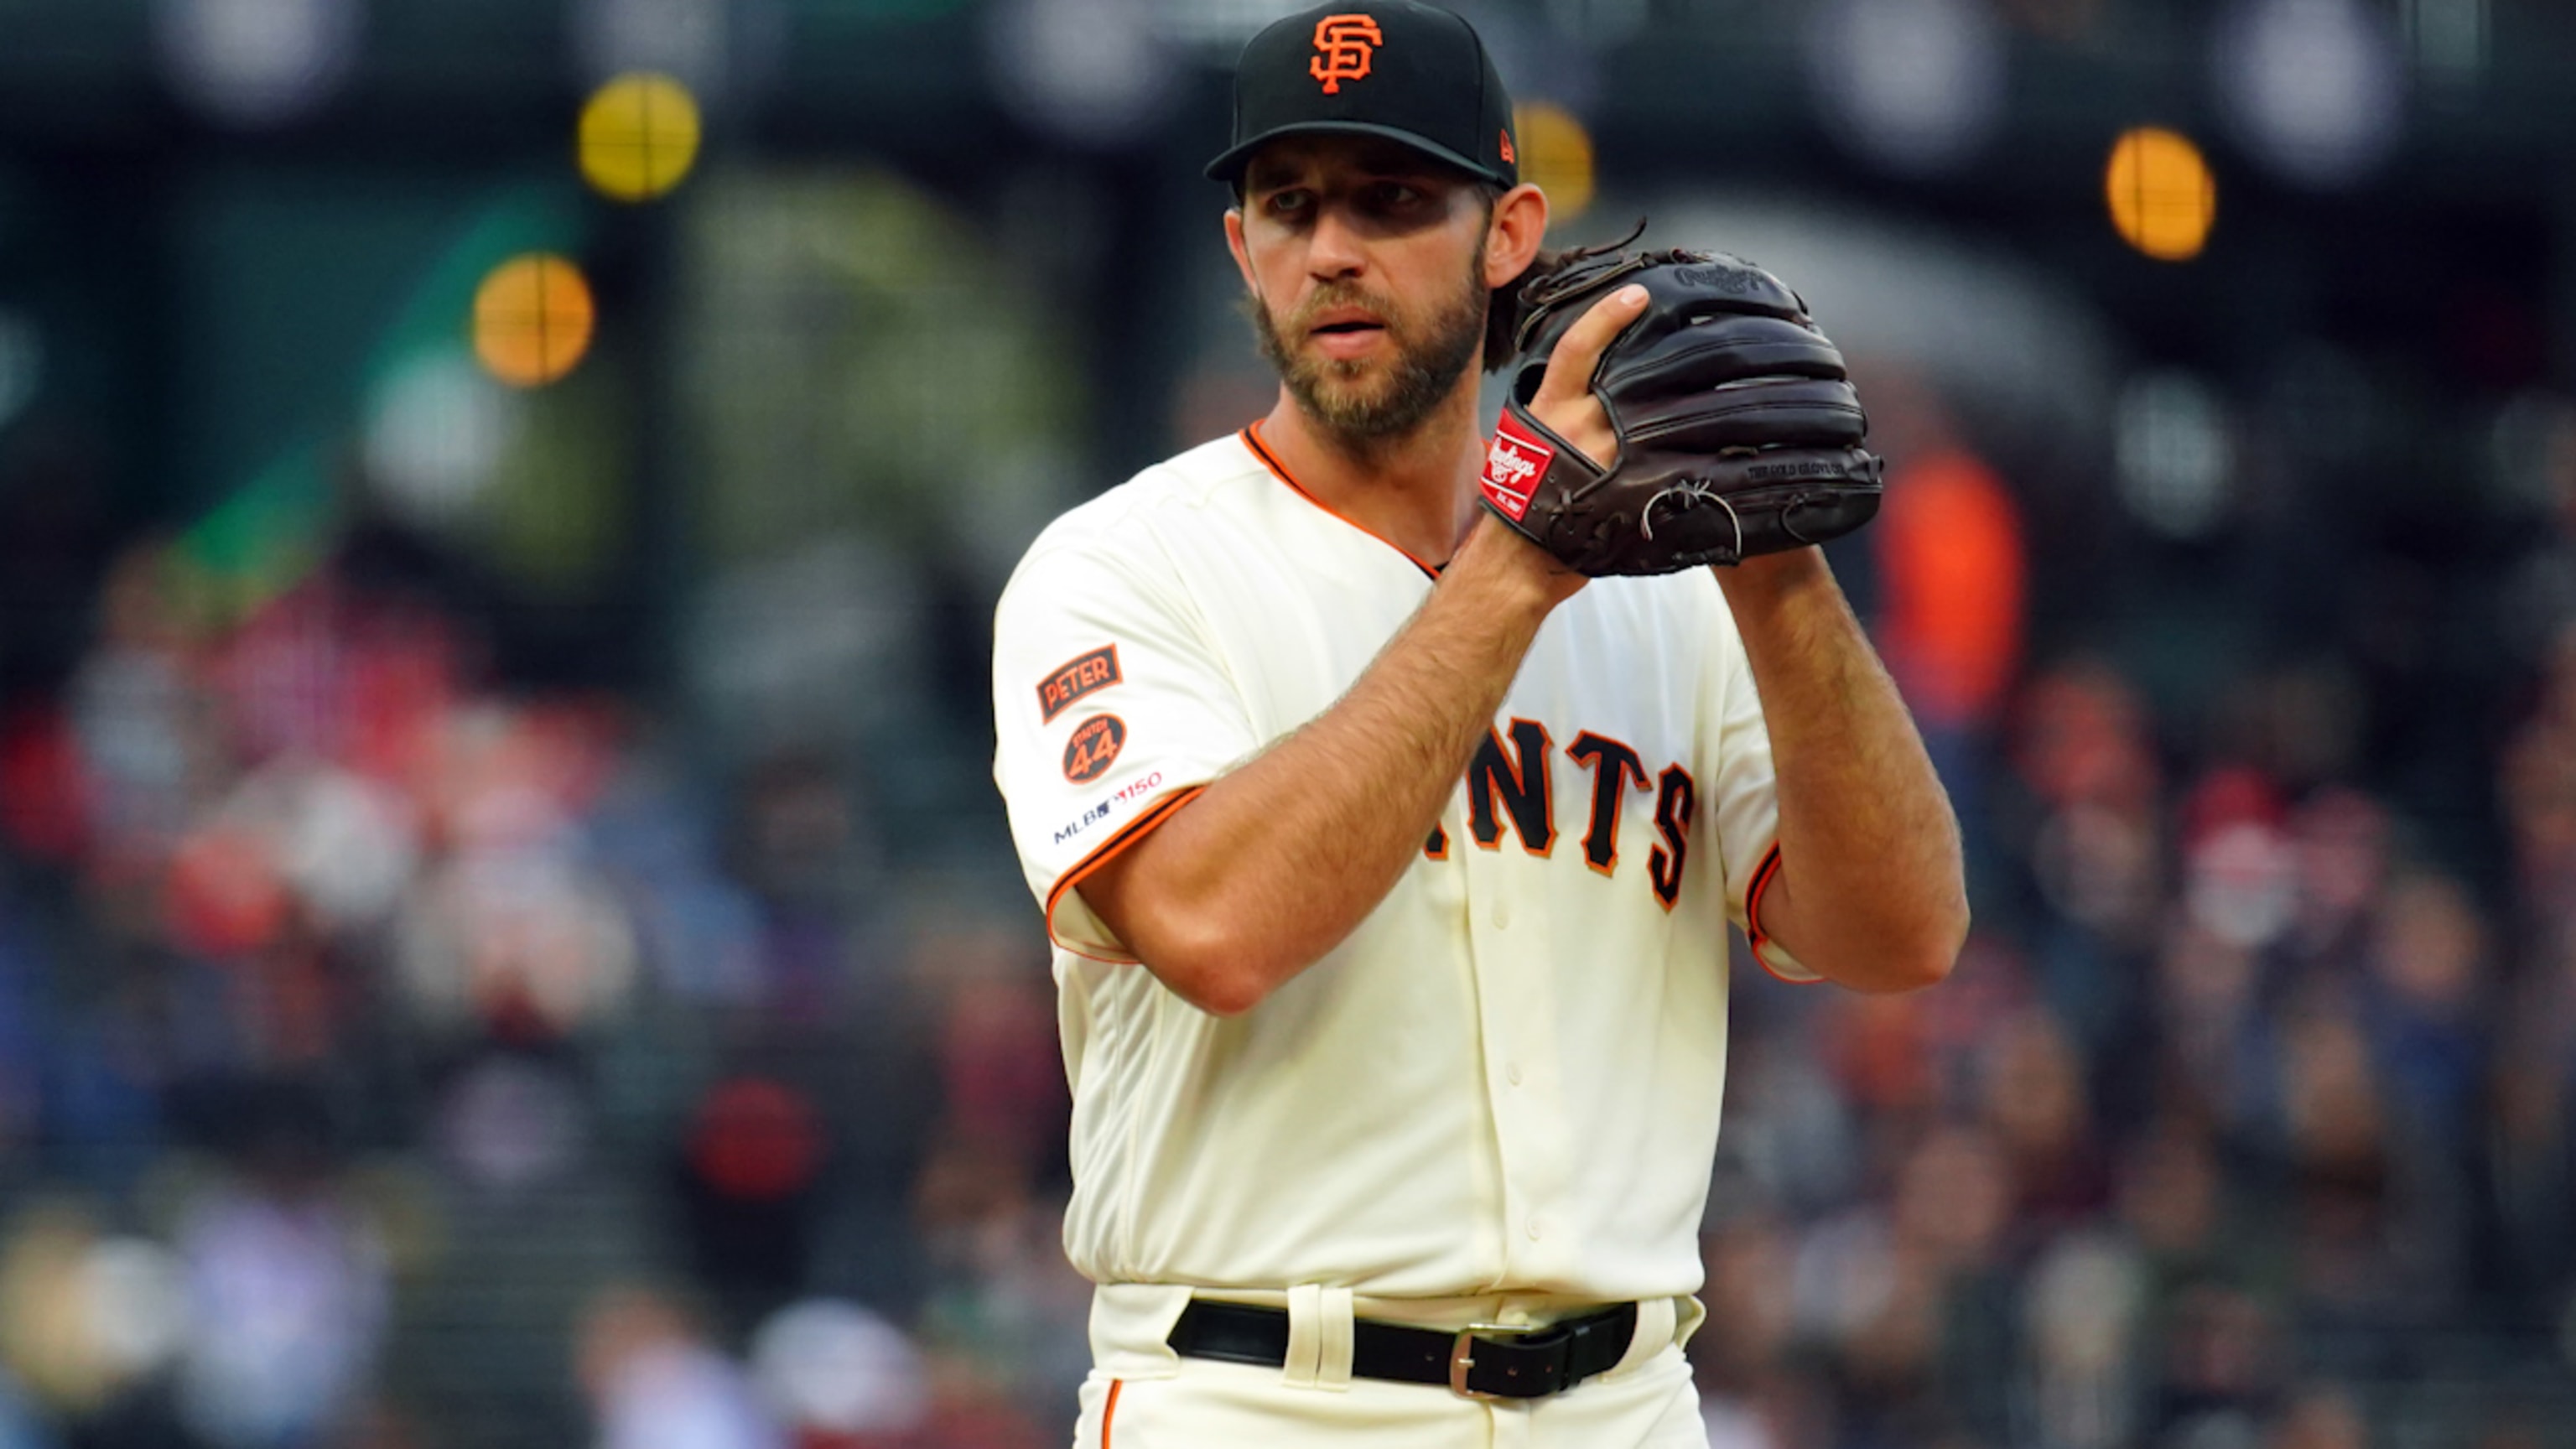 Giants notes: Bumgarner might not pitch in All-Star Game, either